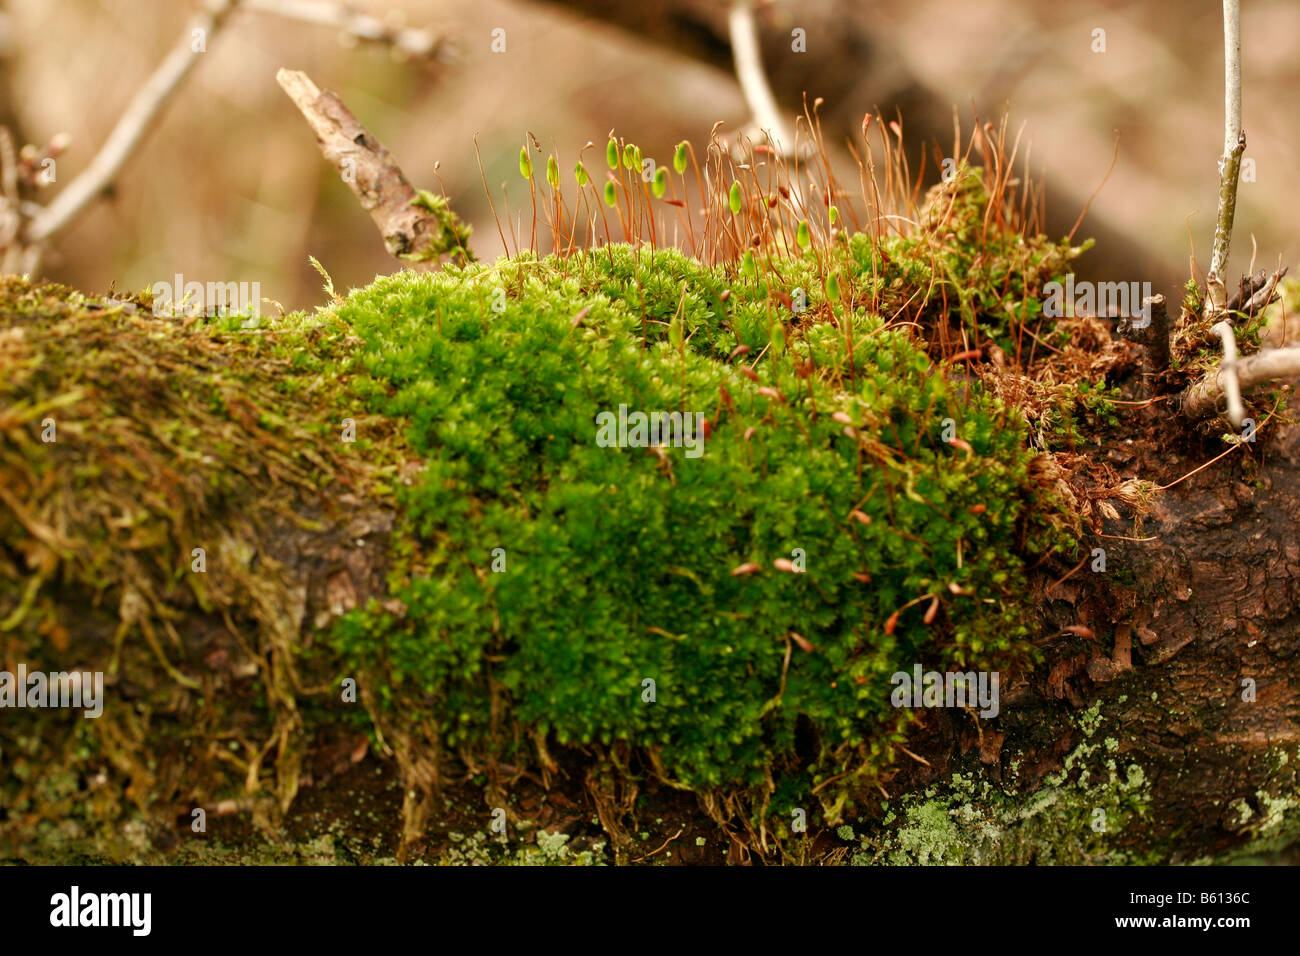 Moss on a branch Stock Photo